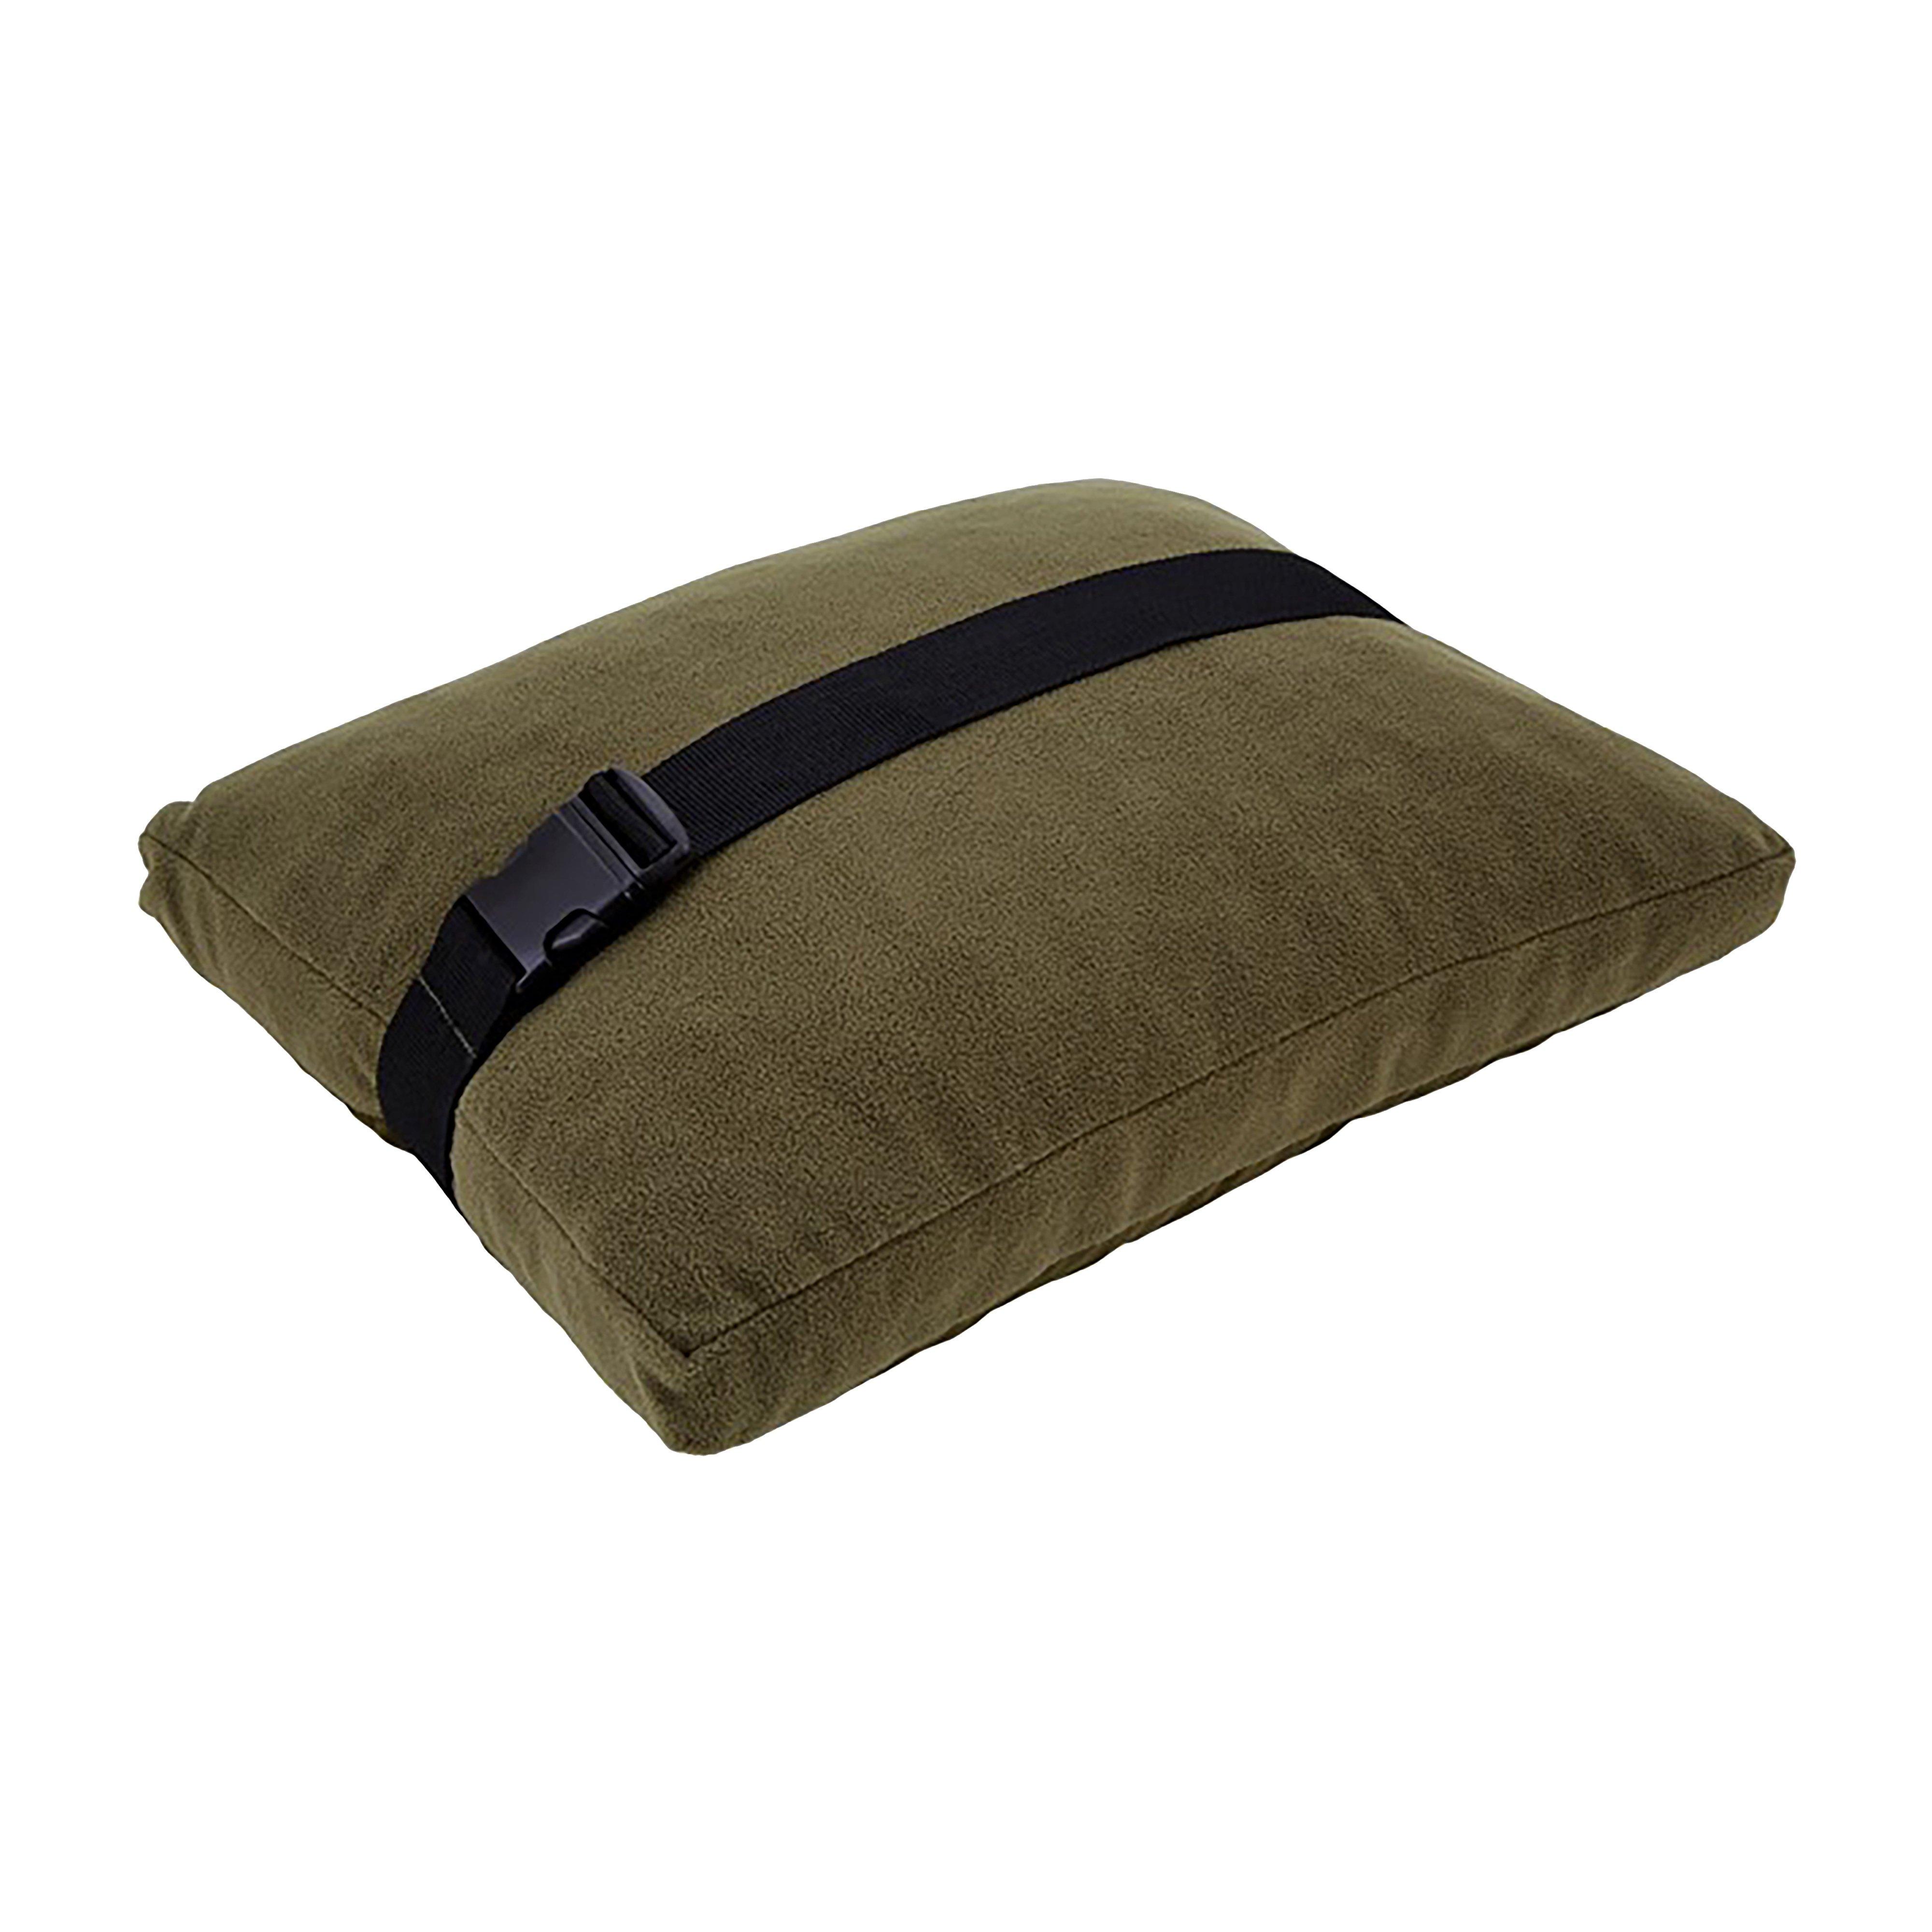 Westlake Double Sided Pillow Large Review